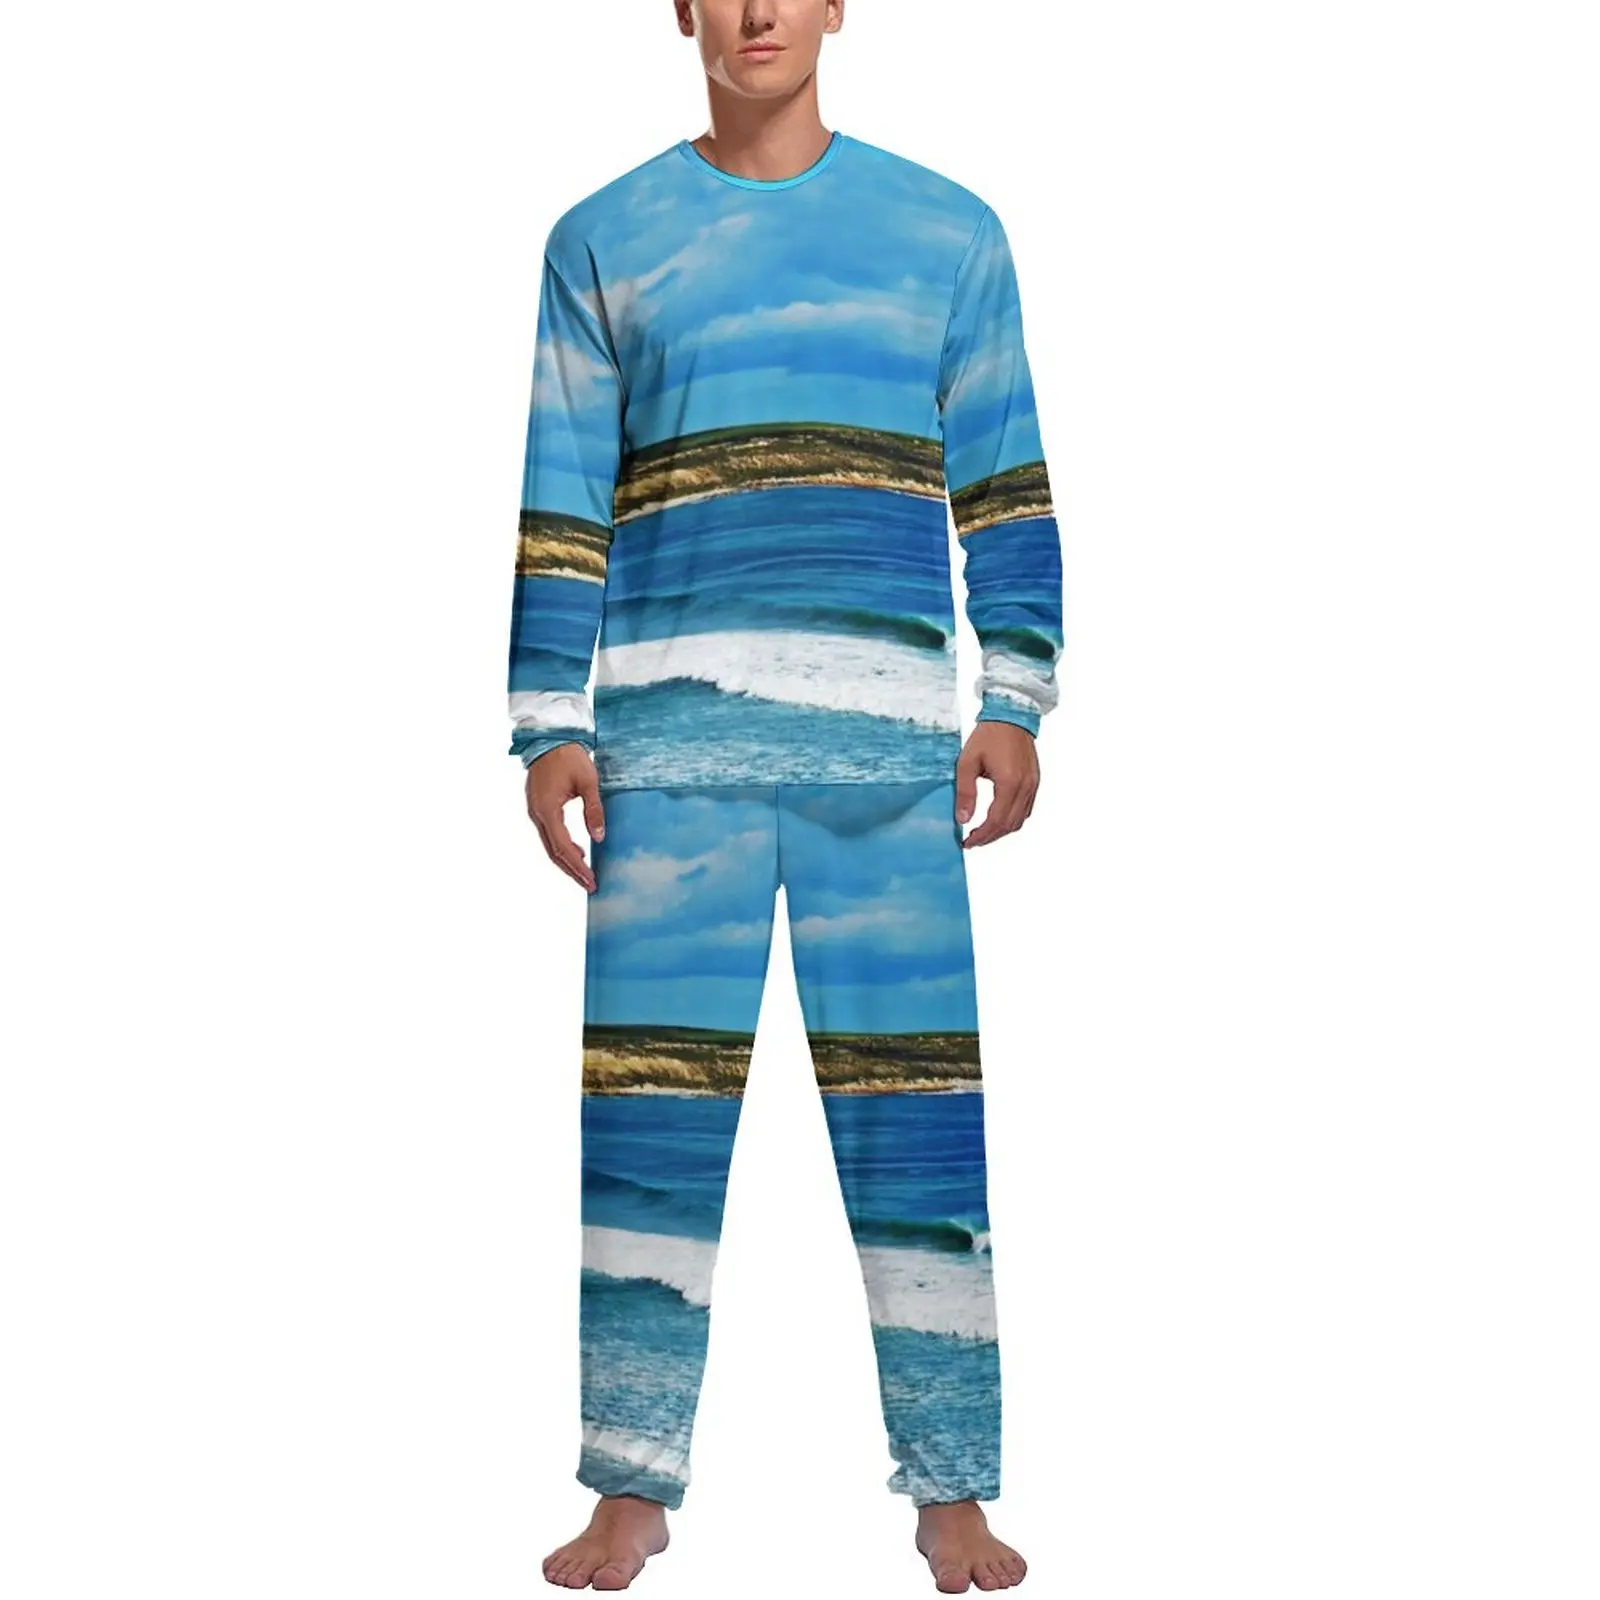 Beach Print Pajamas Spring Two Piece Scent Of The Ocean Soft Pajama Sets Male Long Sleeve Night Graphic Nightwear